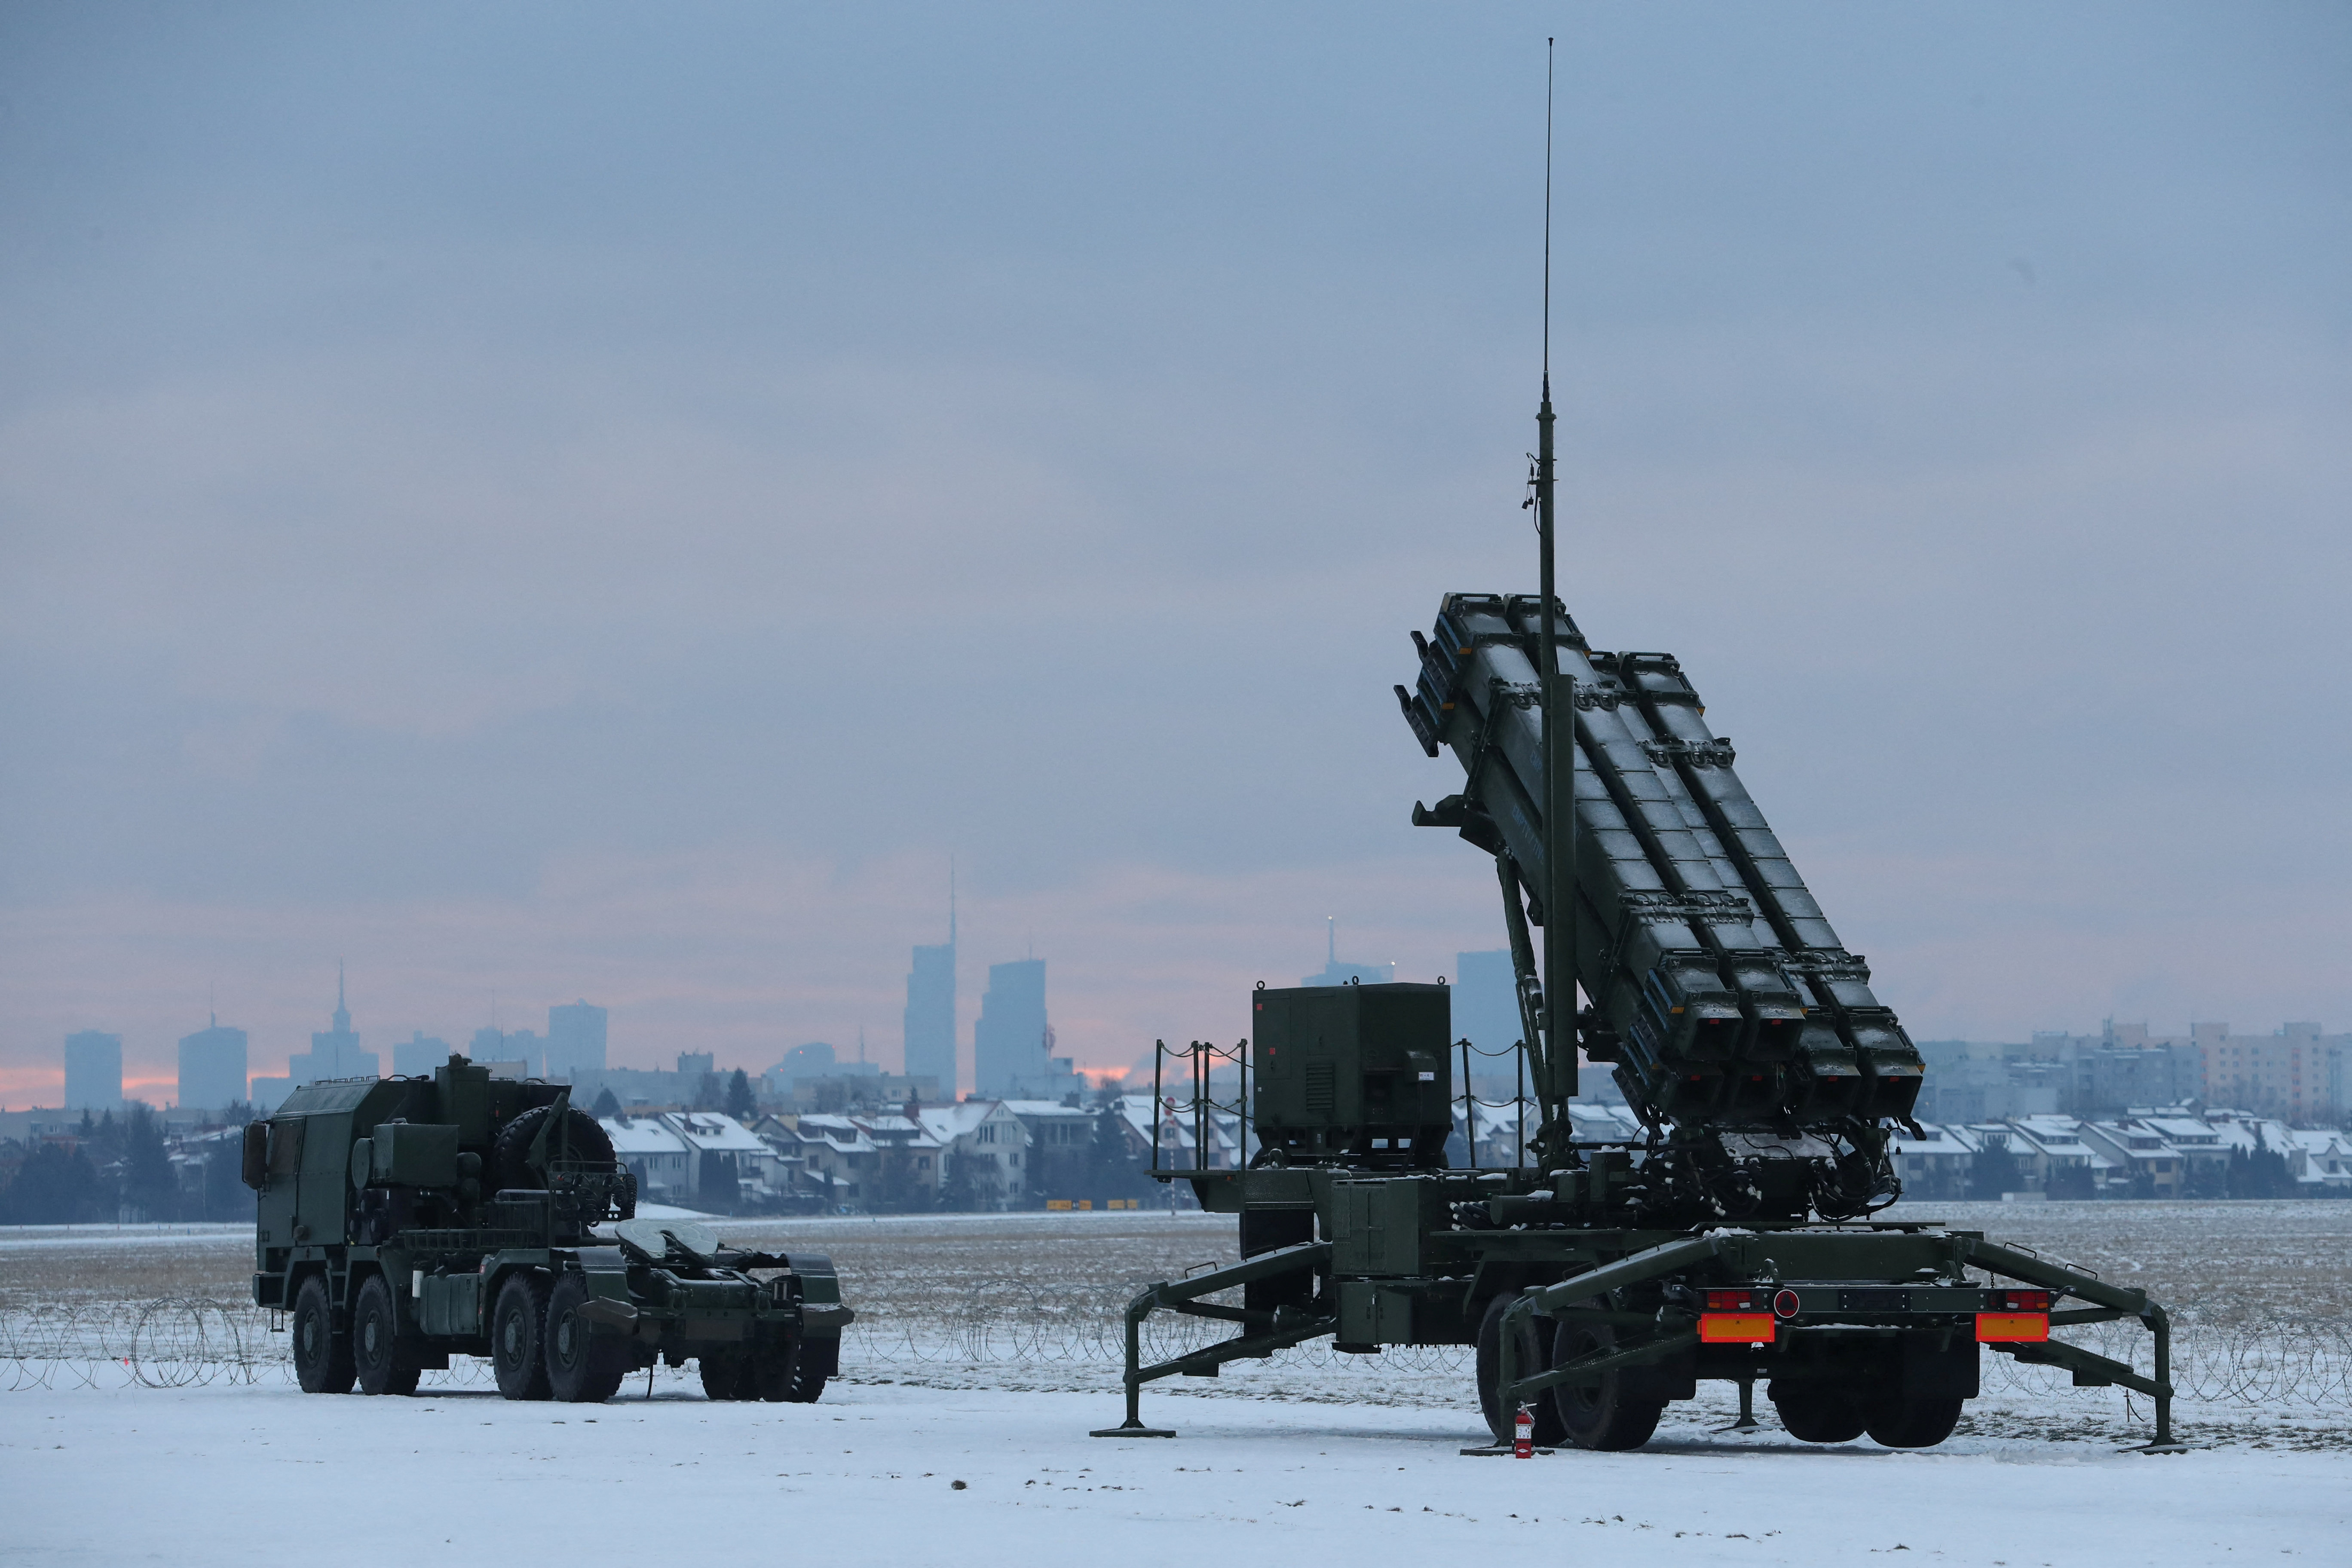 Polish military training on Patriot air defence missile systems at the airport in Warsaw